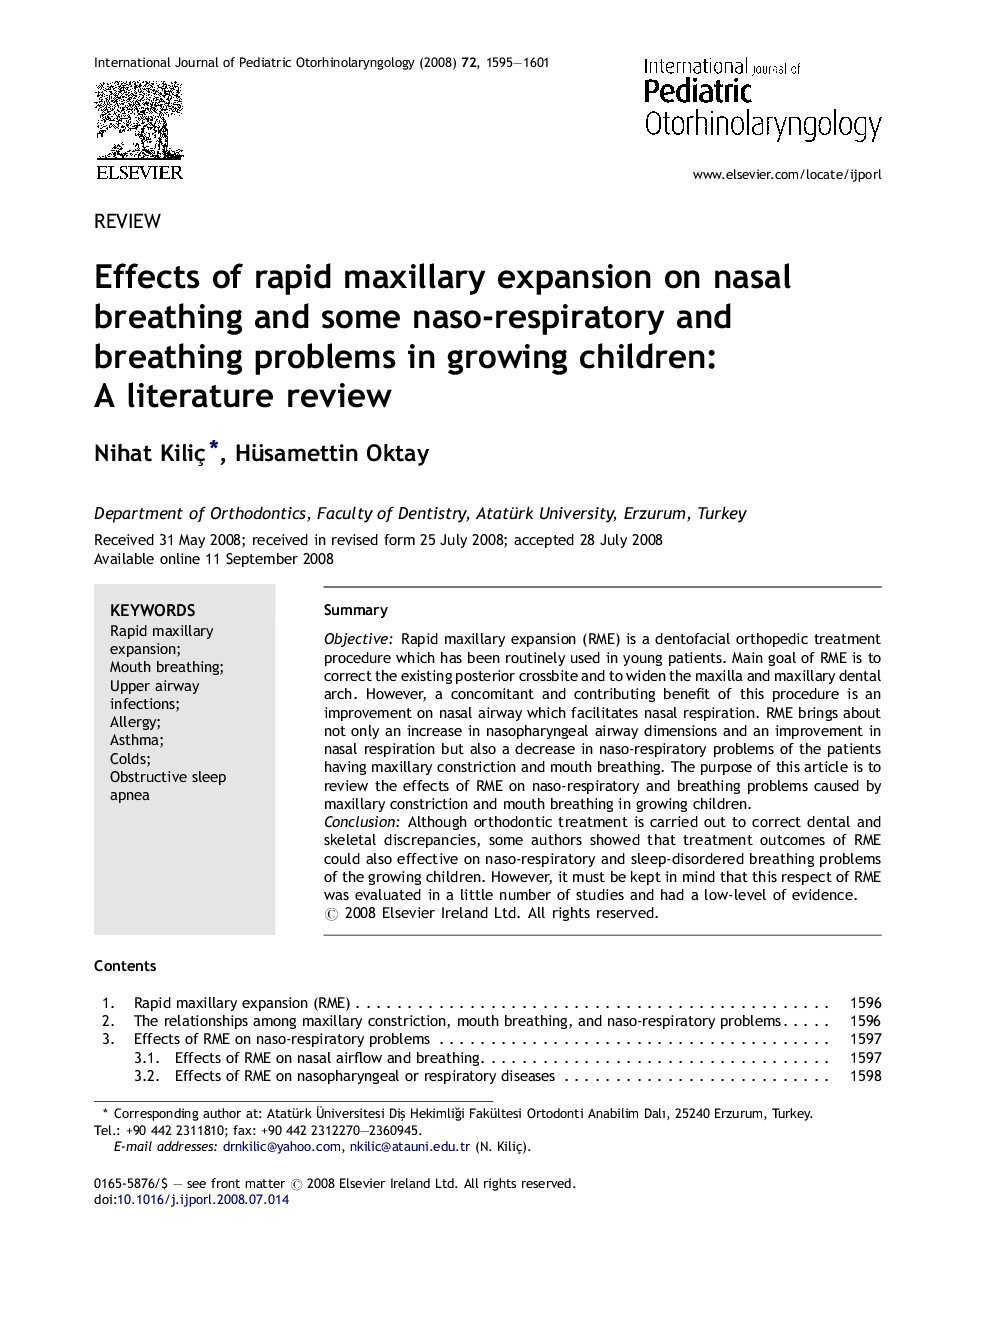 Effects of rapid maxillary expansion on nasal breathing and some naso-respiratory and breathing problems in growing children: A literature review